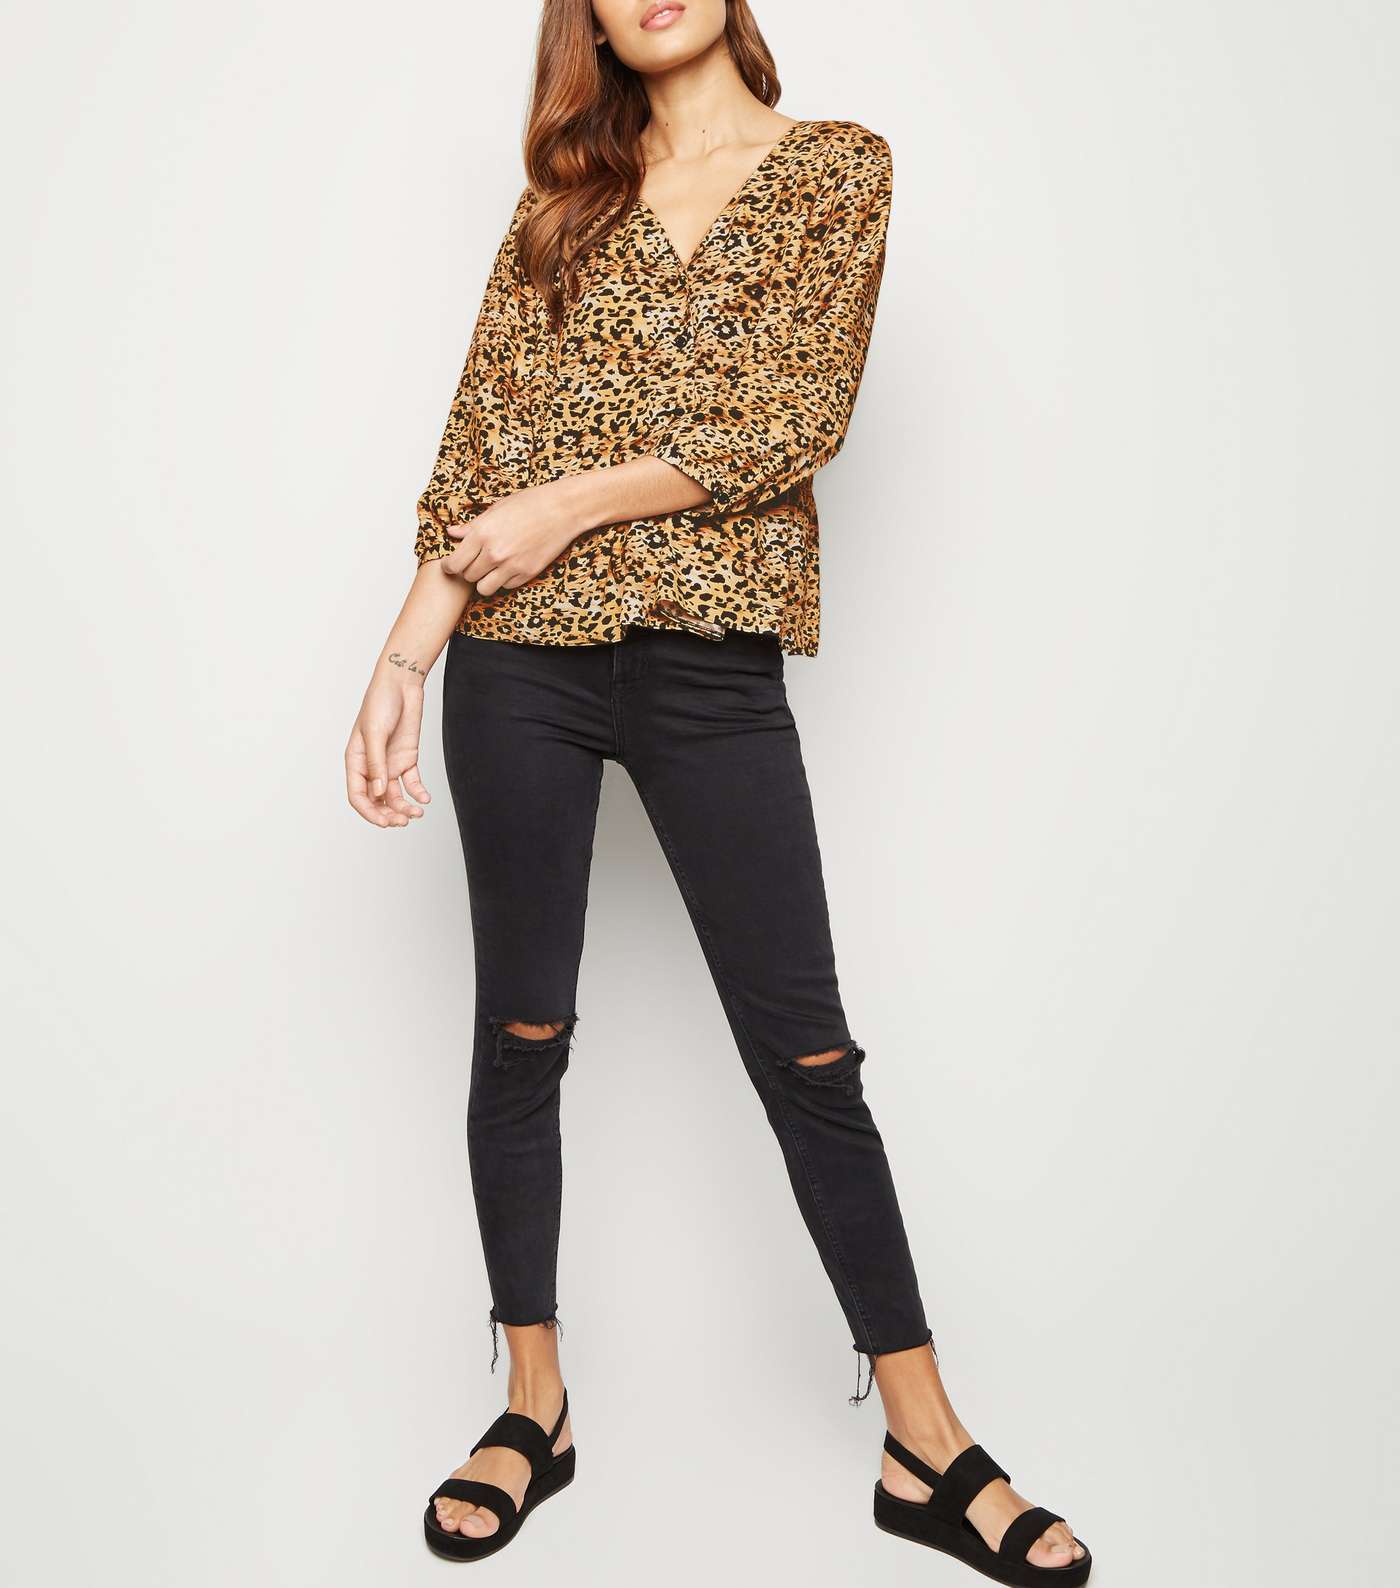 Brown Leopard Print Button Up Top Image 2